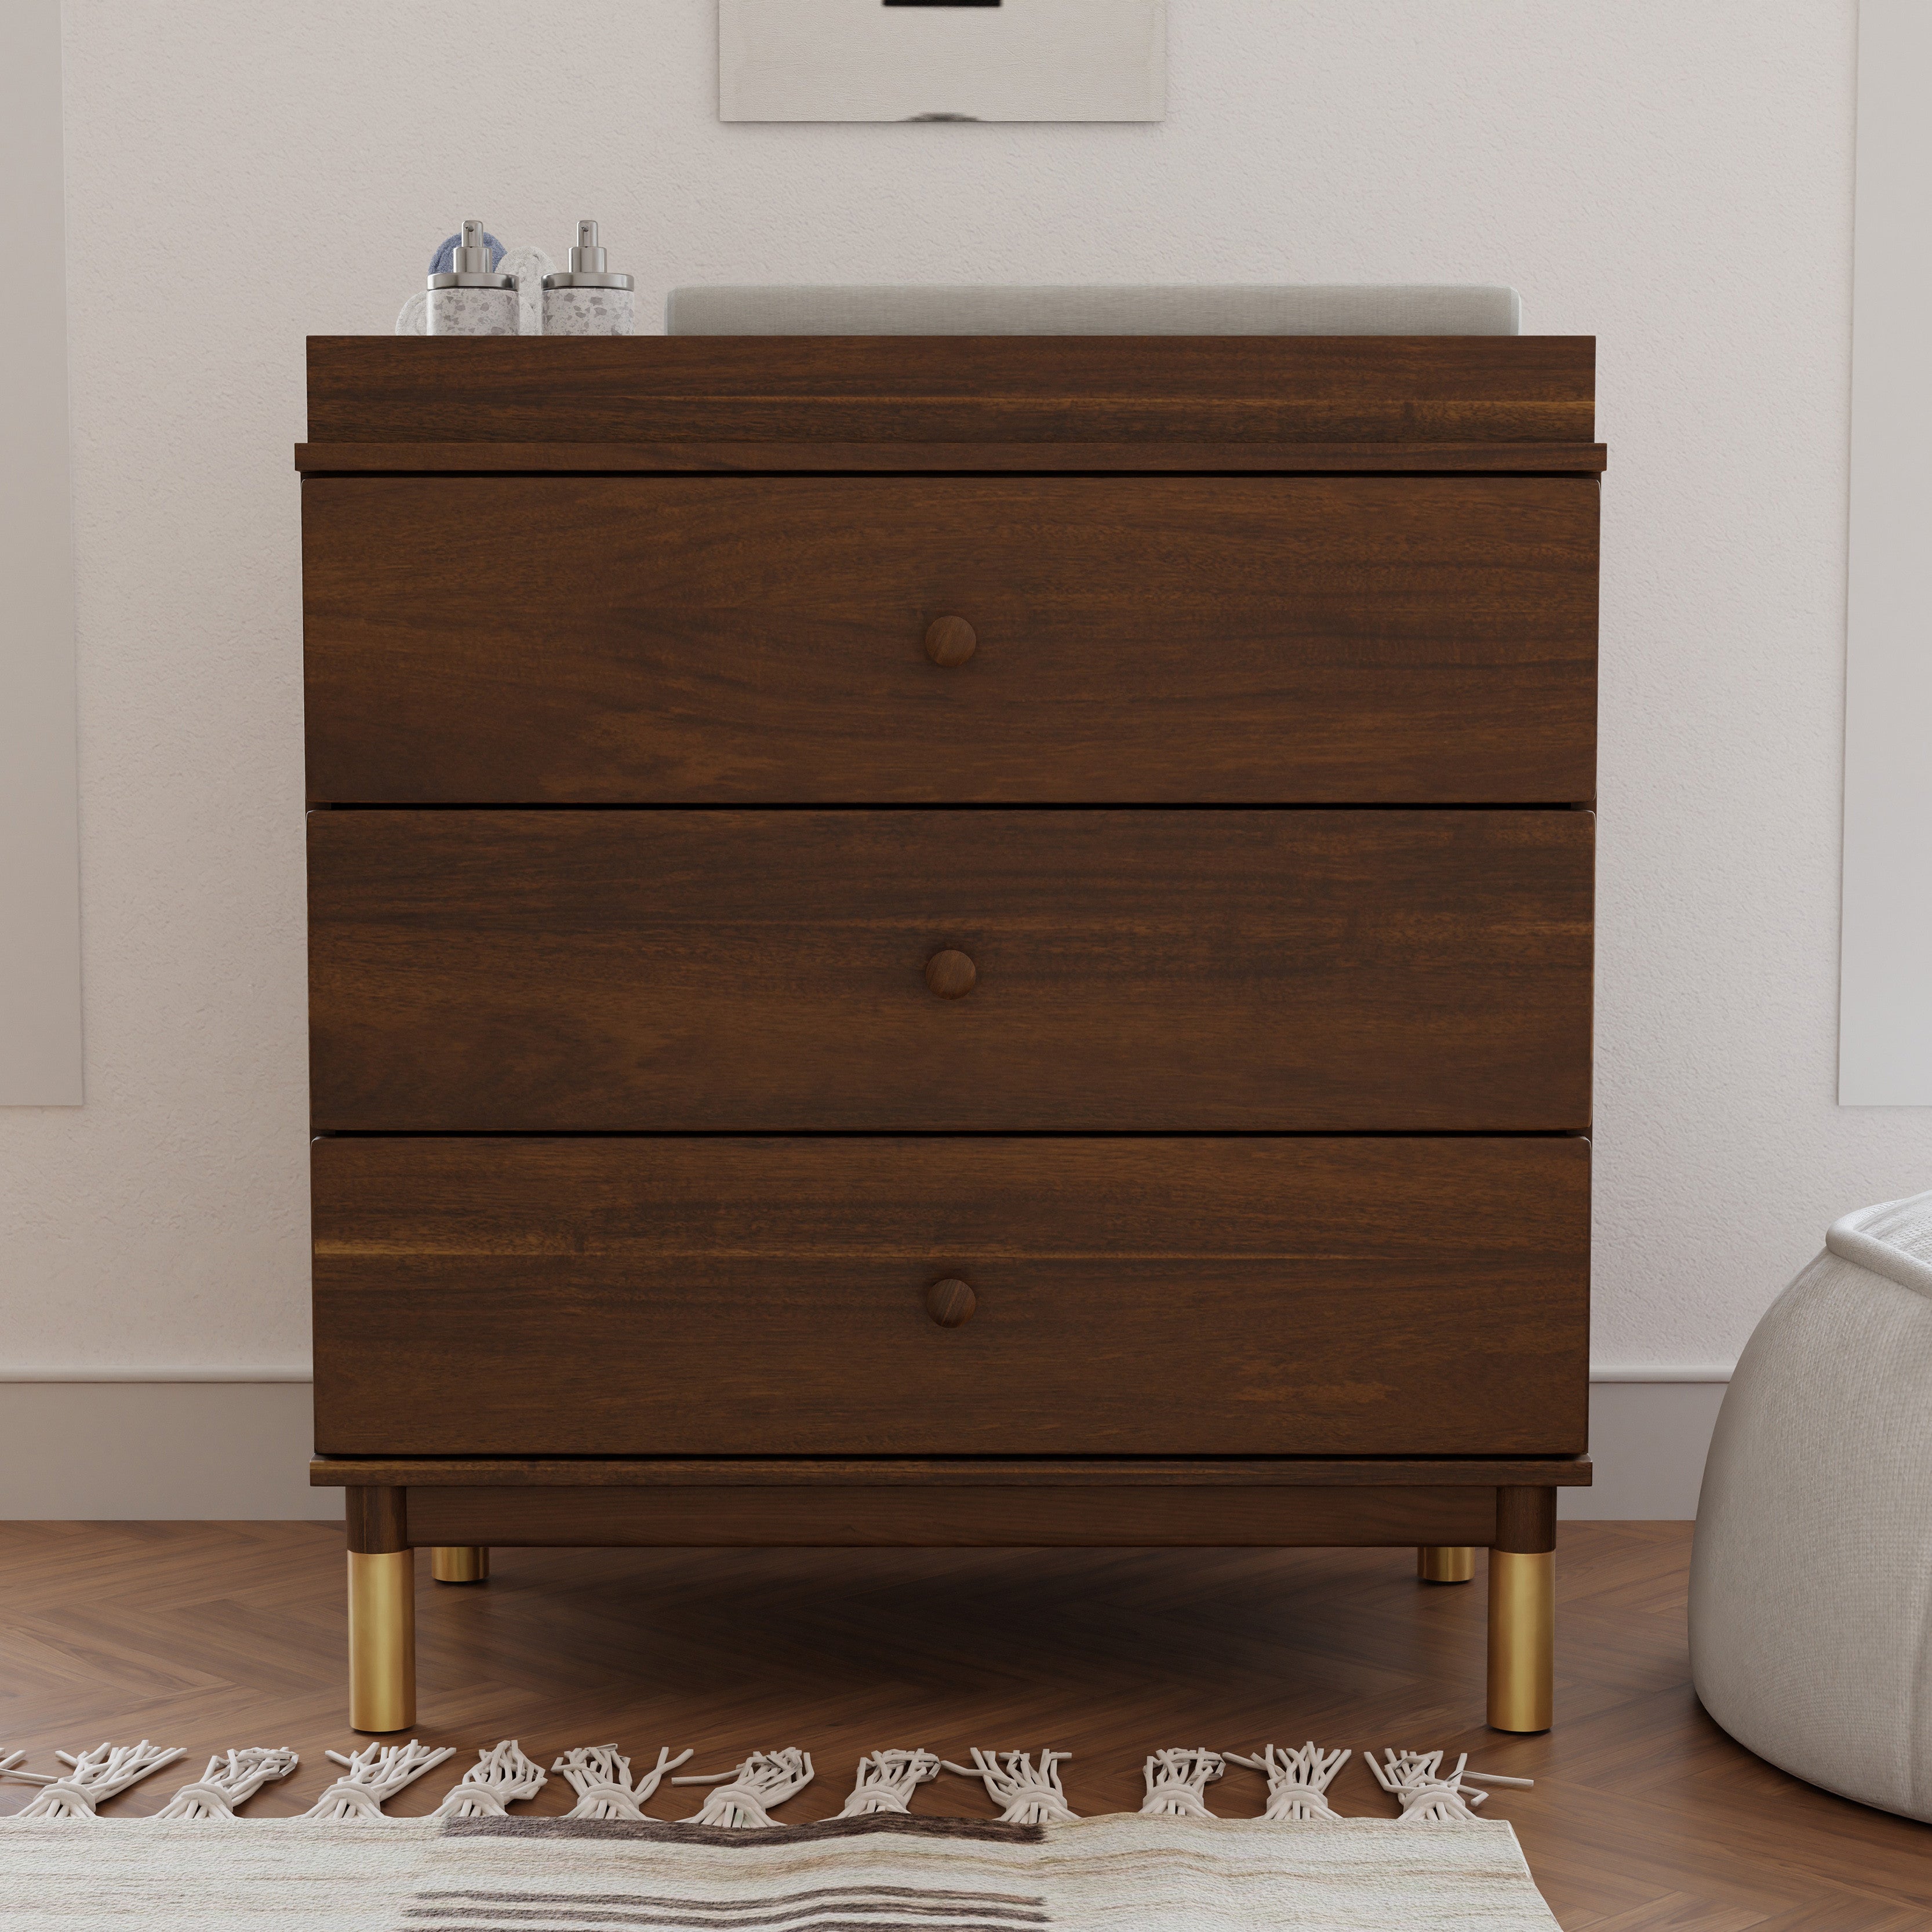 Babyletto Gelato 3 Drawer Changer Dresser with Removable Changing Tray - Natural Walnut / Gold Feet